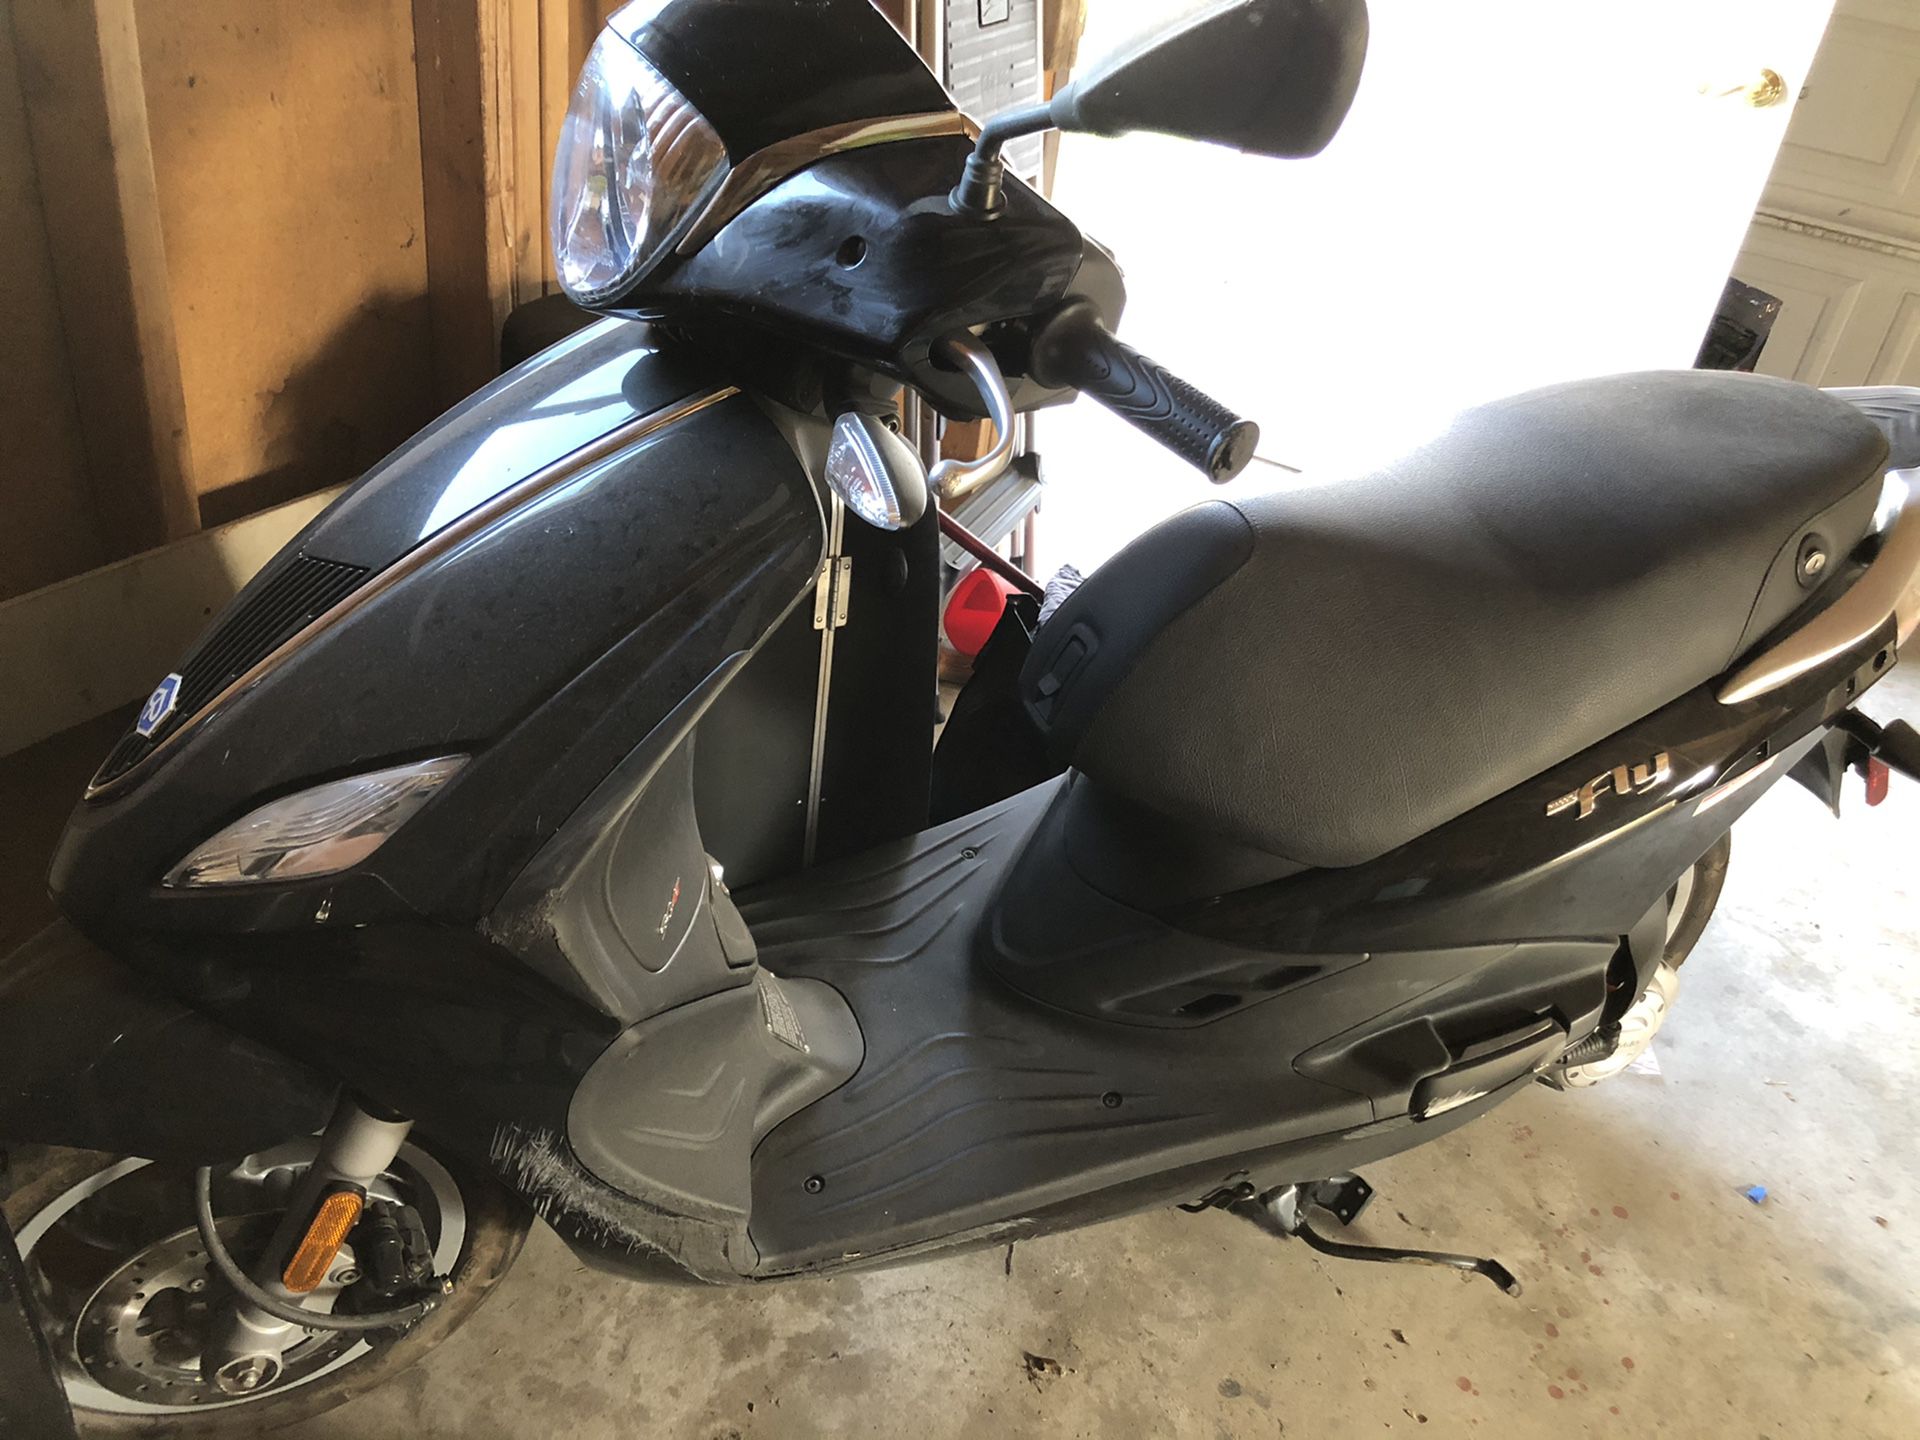 2016 Piaggio Fly Scooter Moped 50cc